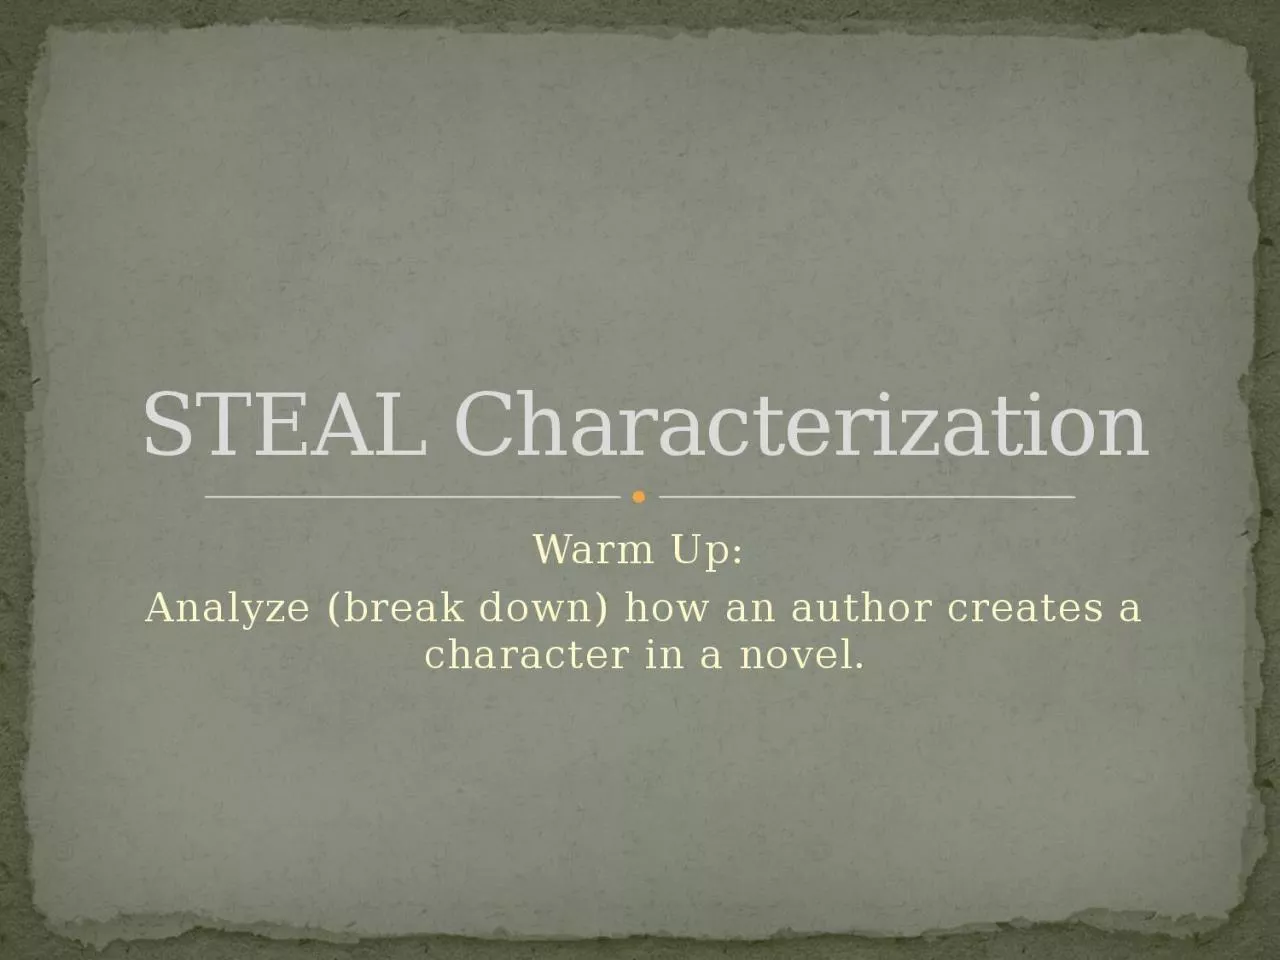 Warm Up:  Analyze (break down) how an author creates a character in a novel.